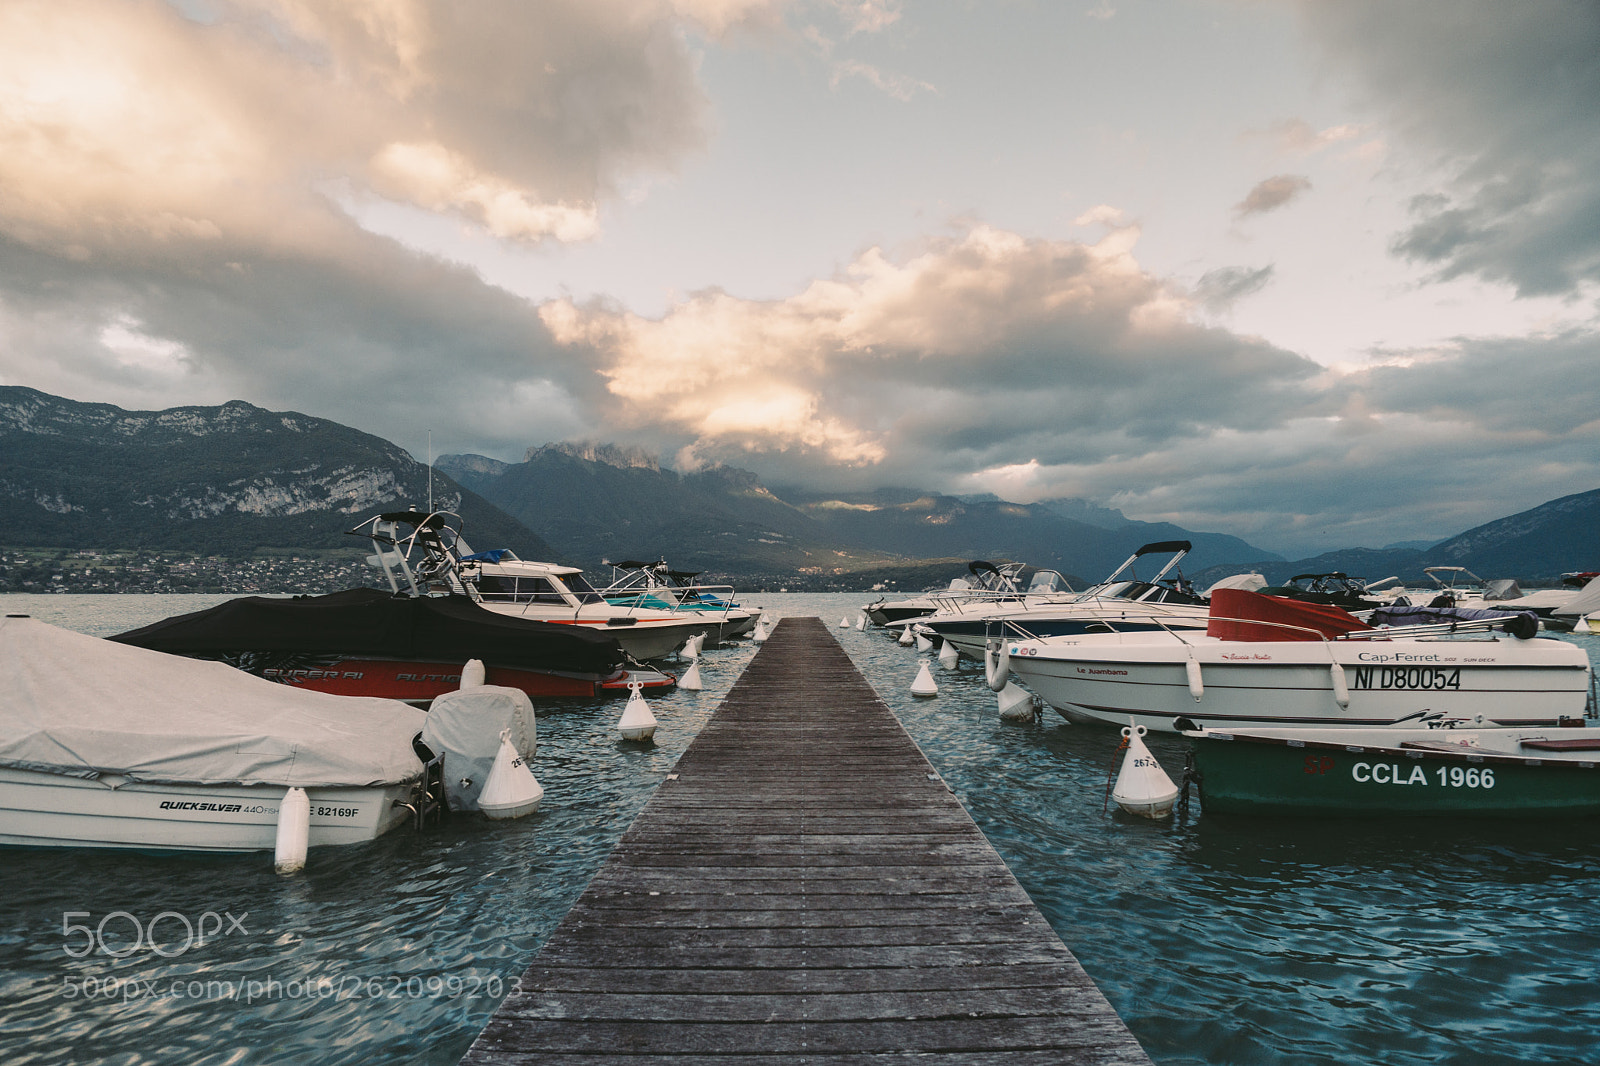 Sony a6300 sample photo. Lake annecy | france photography